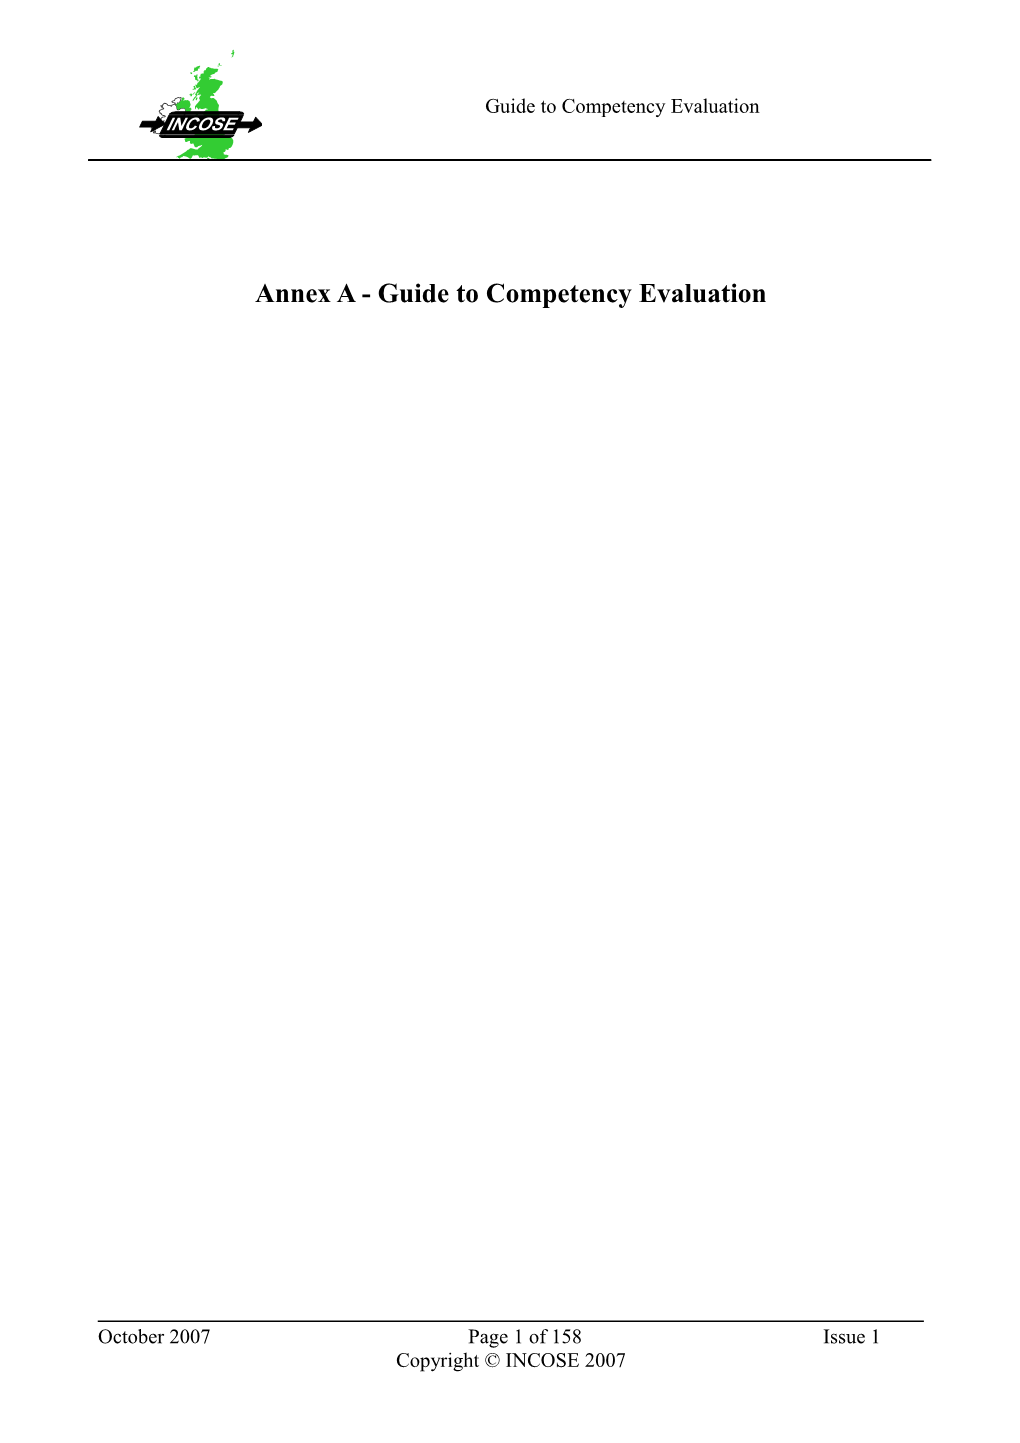 Annex a - Guide to Competency Evaluation